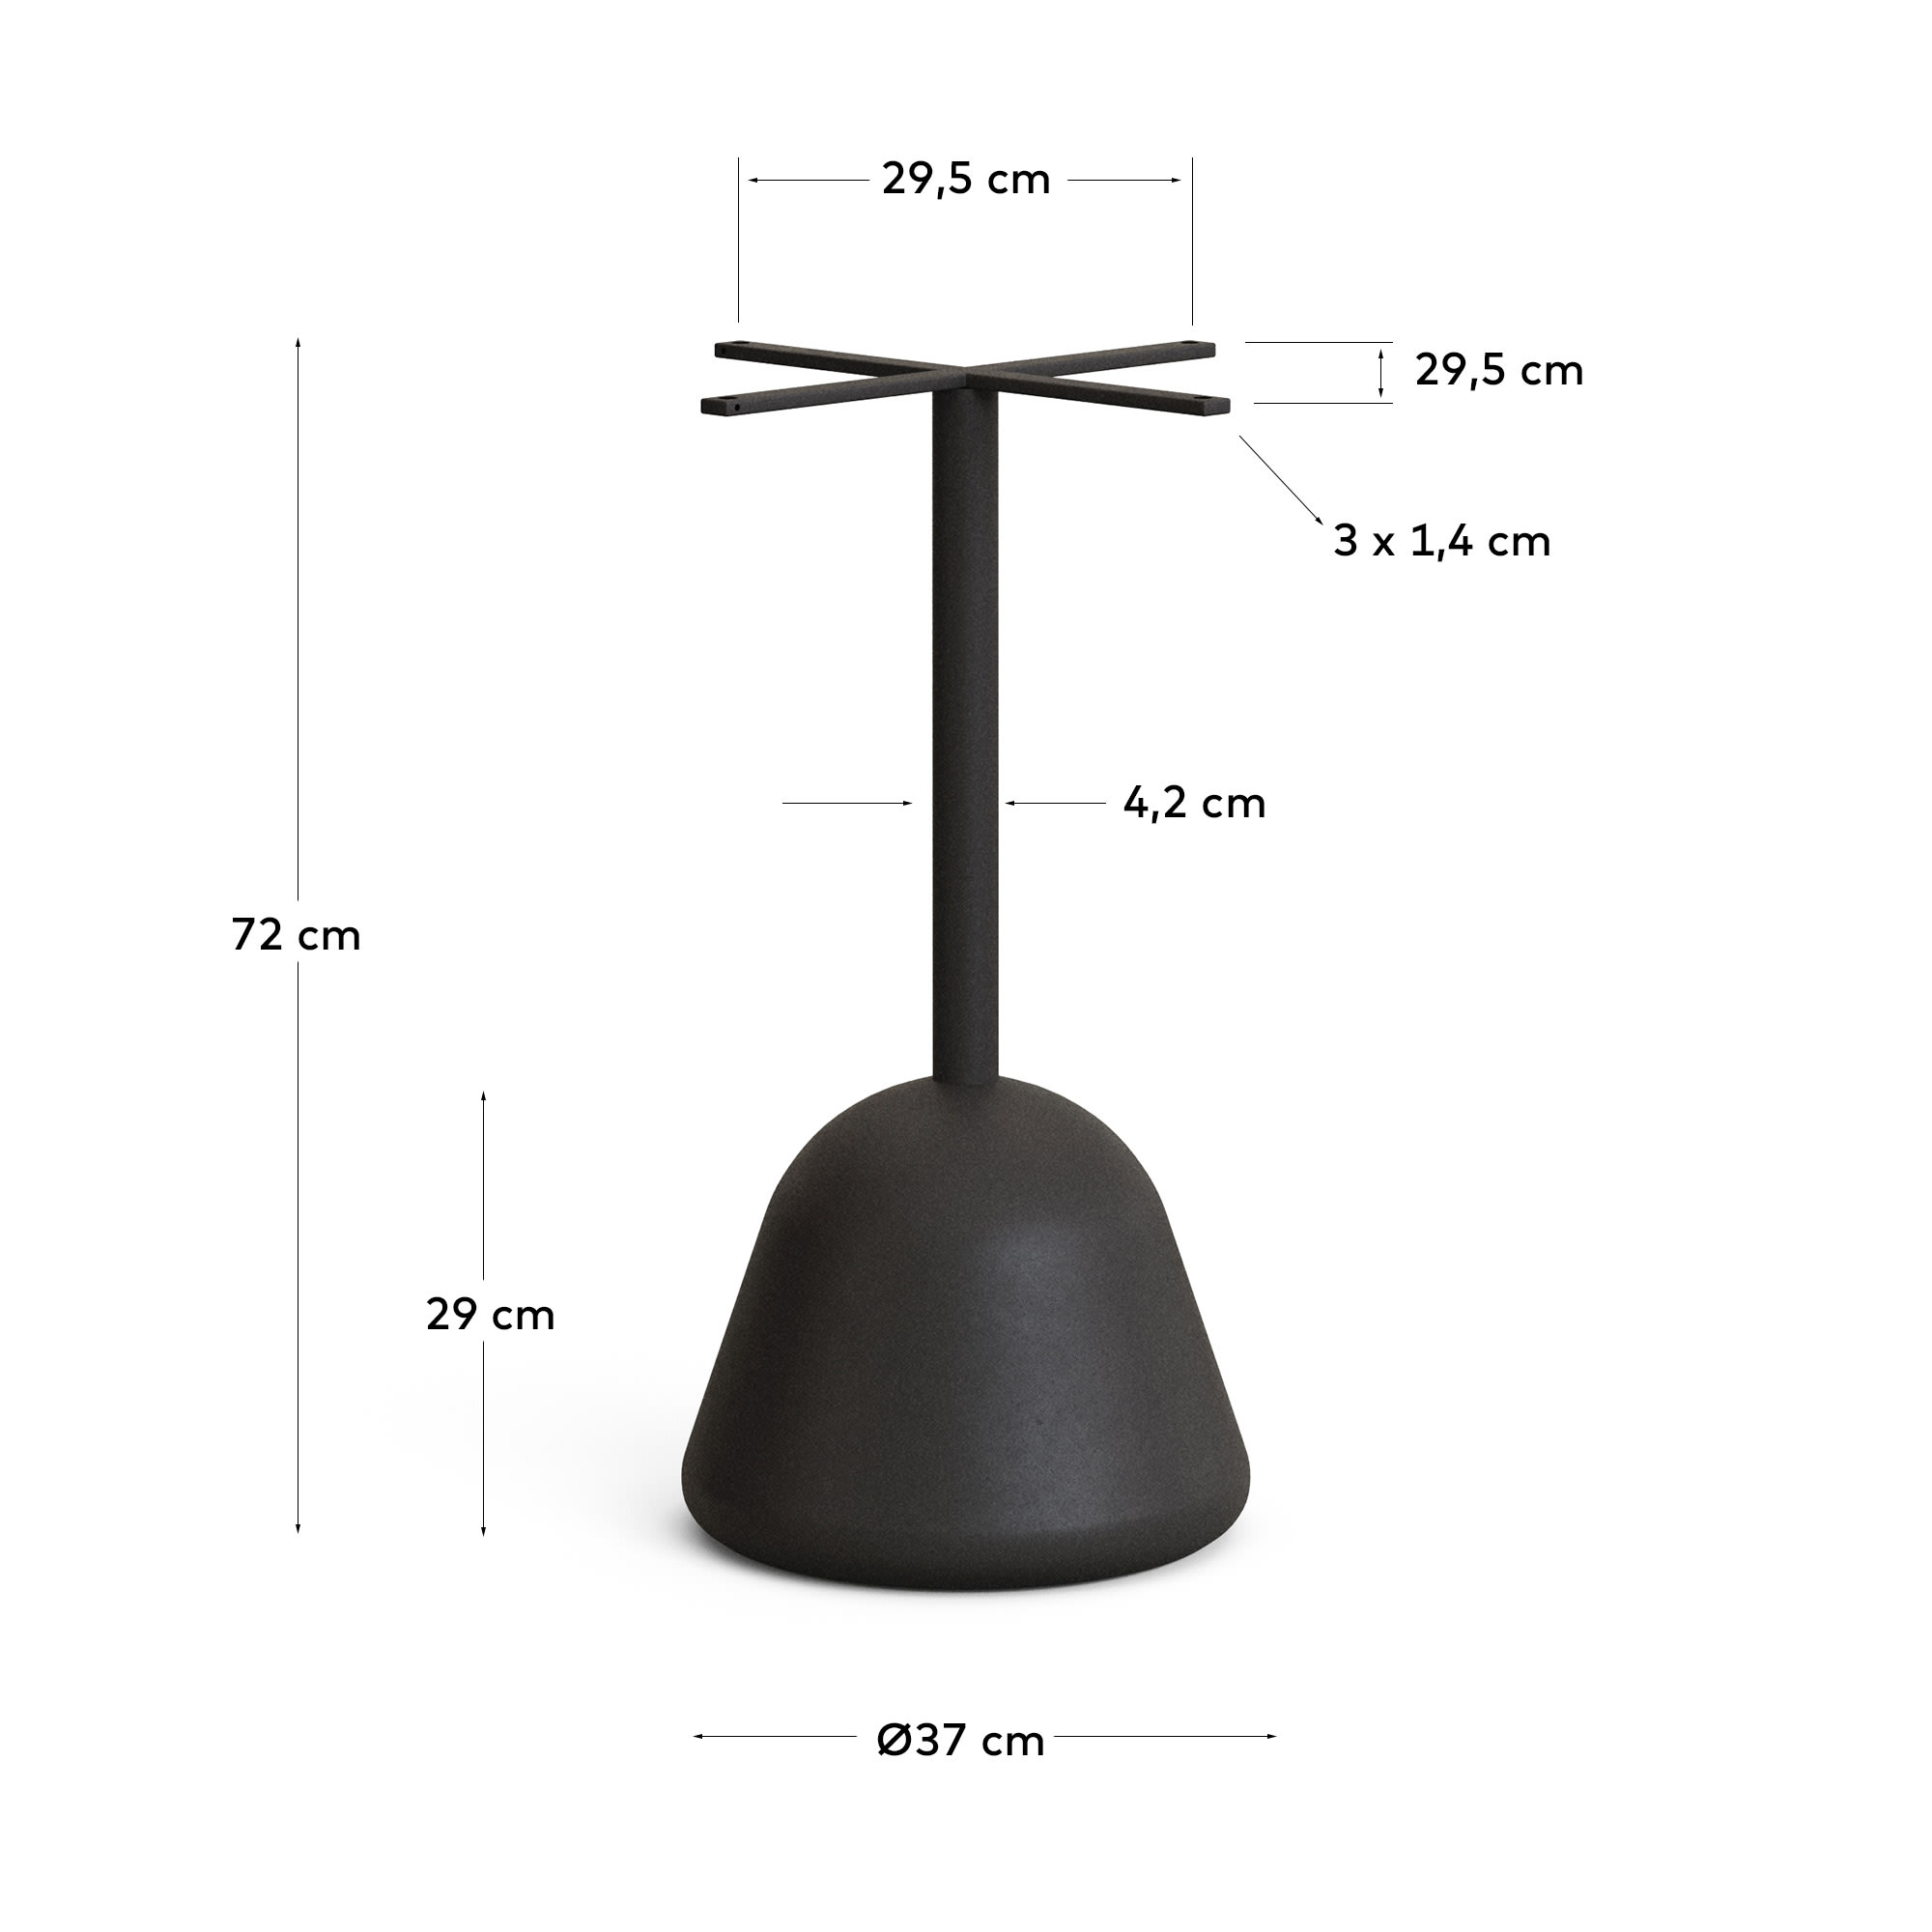 Saura Outdoor Table Base made of Steel with Black Painted Finish Ø 37 x 75 cm - sizes